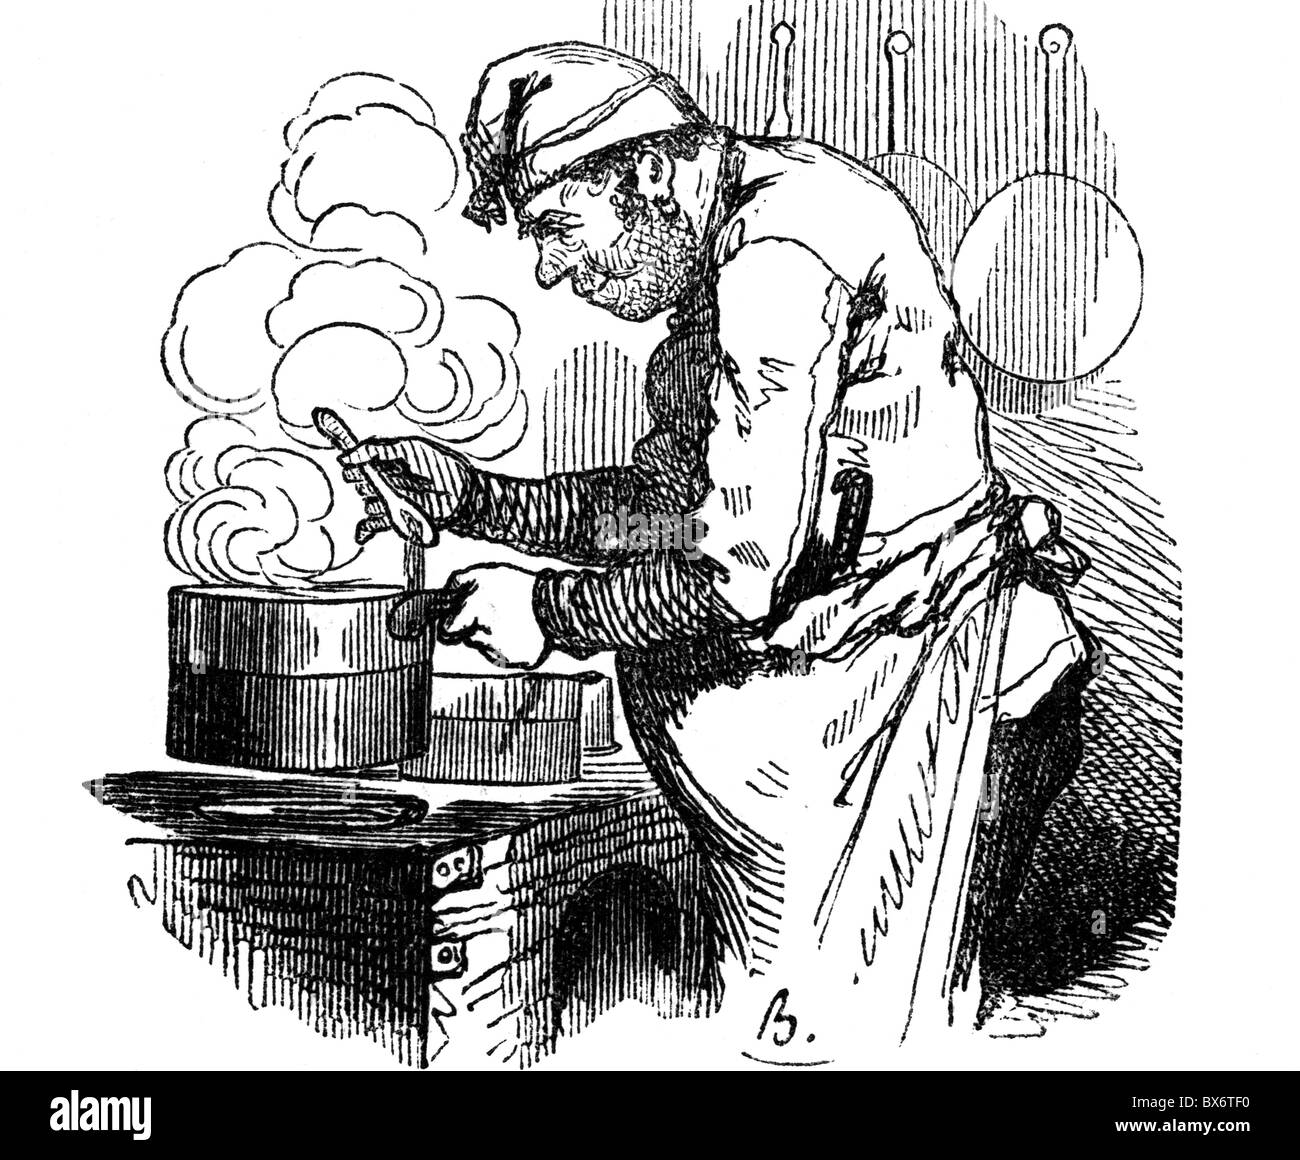 people, professions, cook, caricature, drawing by Blanchard, France, 19th century, pot, oven, satire, cooking, chef, French, historic, historical, Additional-Rights-Clearences-Not Available Stock Photo